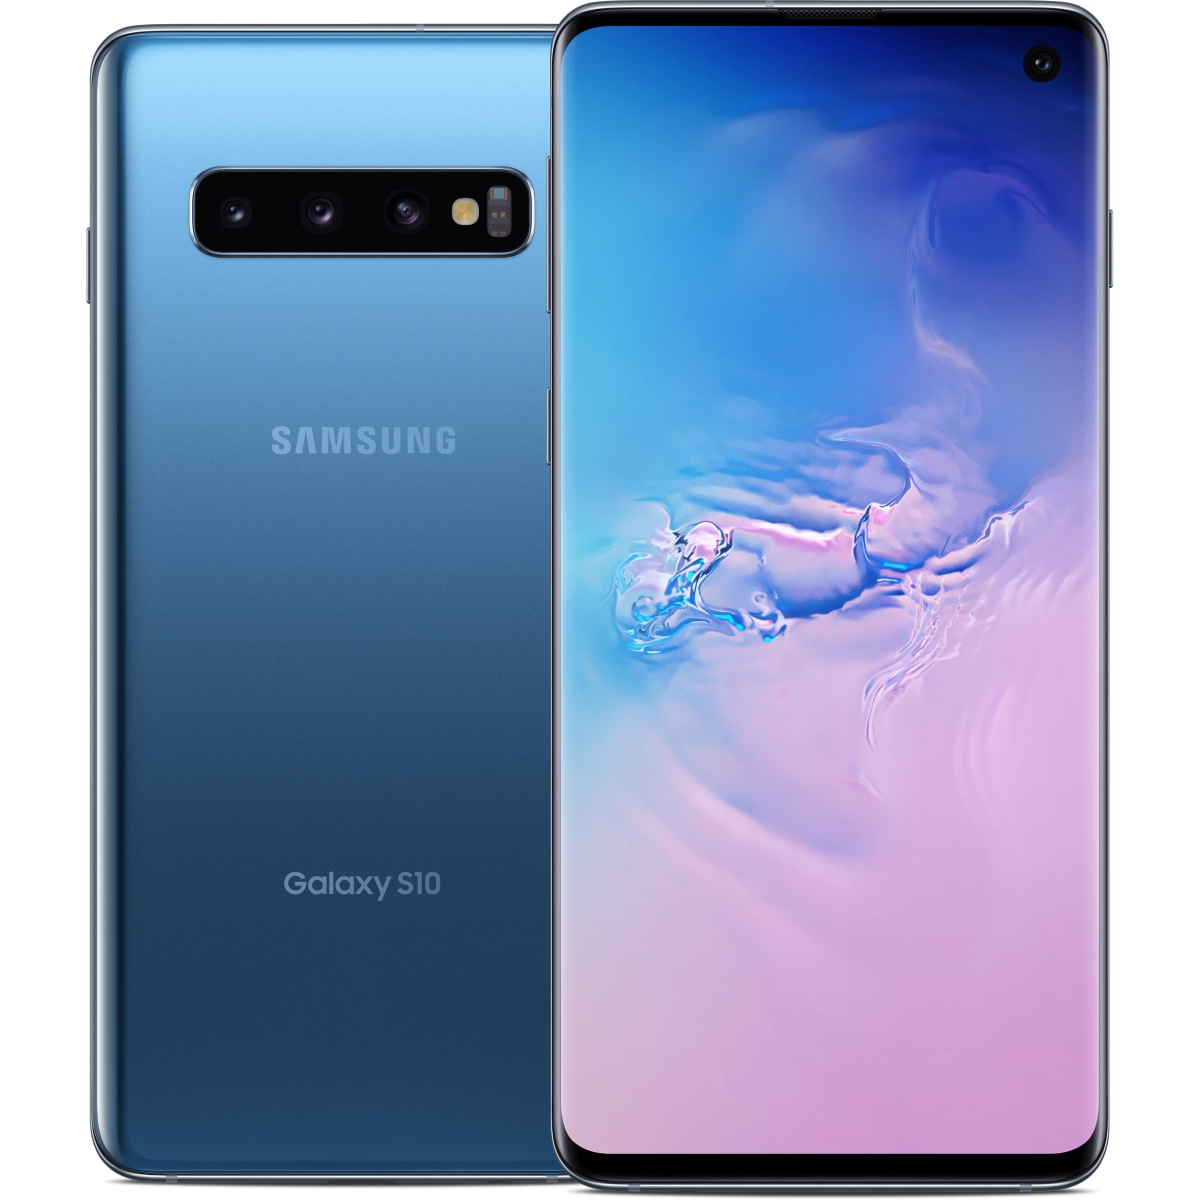 Picture of Samsung PSB100137 128GB GSM & CDMA Unlocked Android Phone with USA Version for Galaxy S10 G973U - Prism Blue